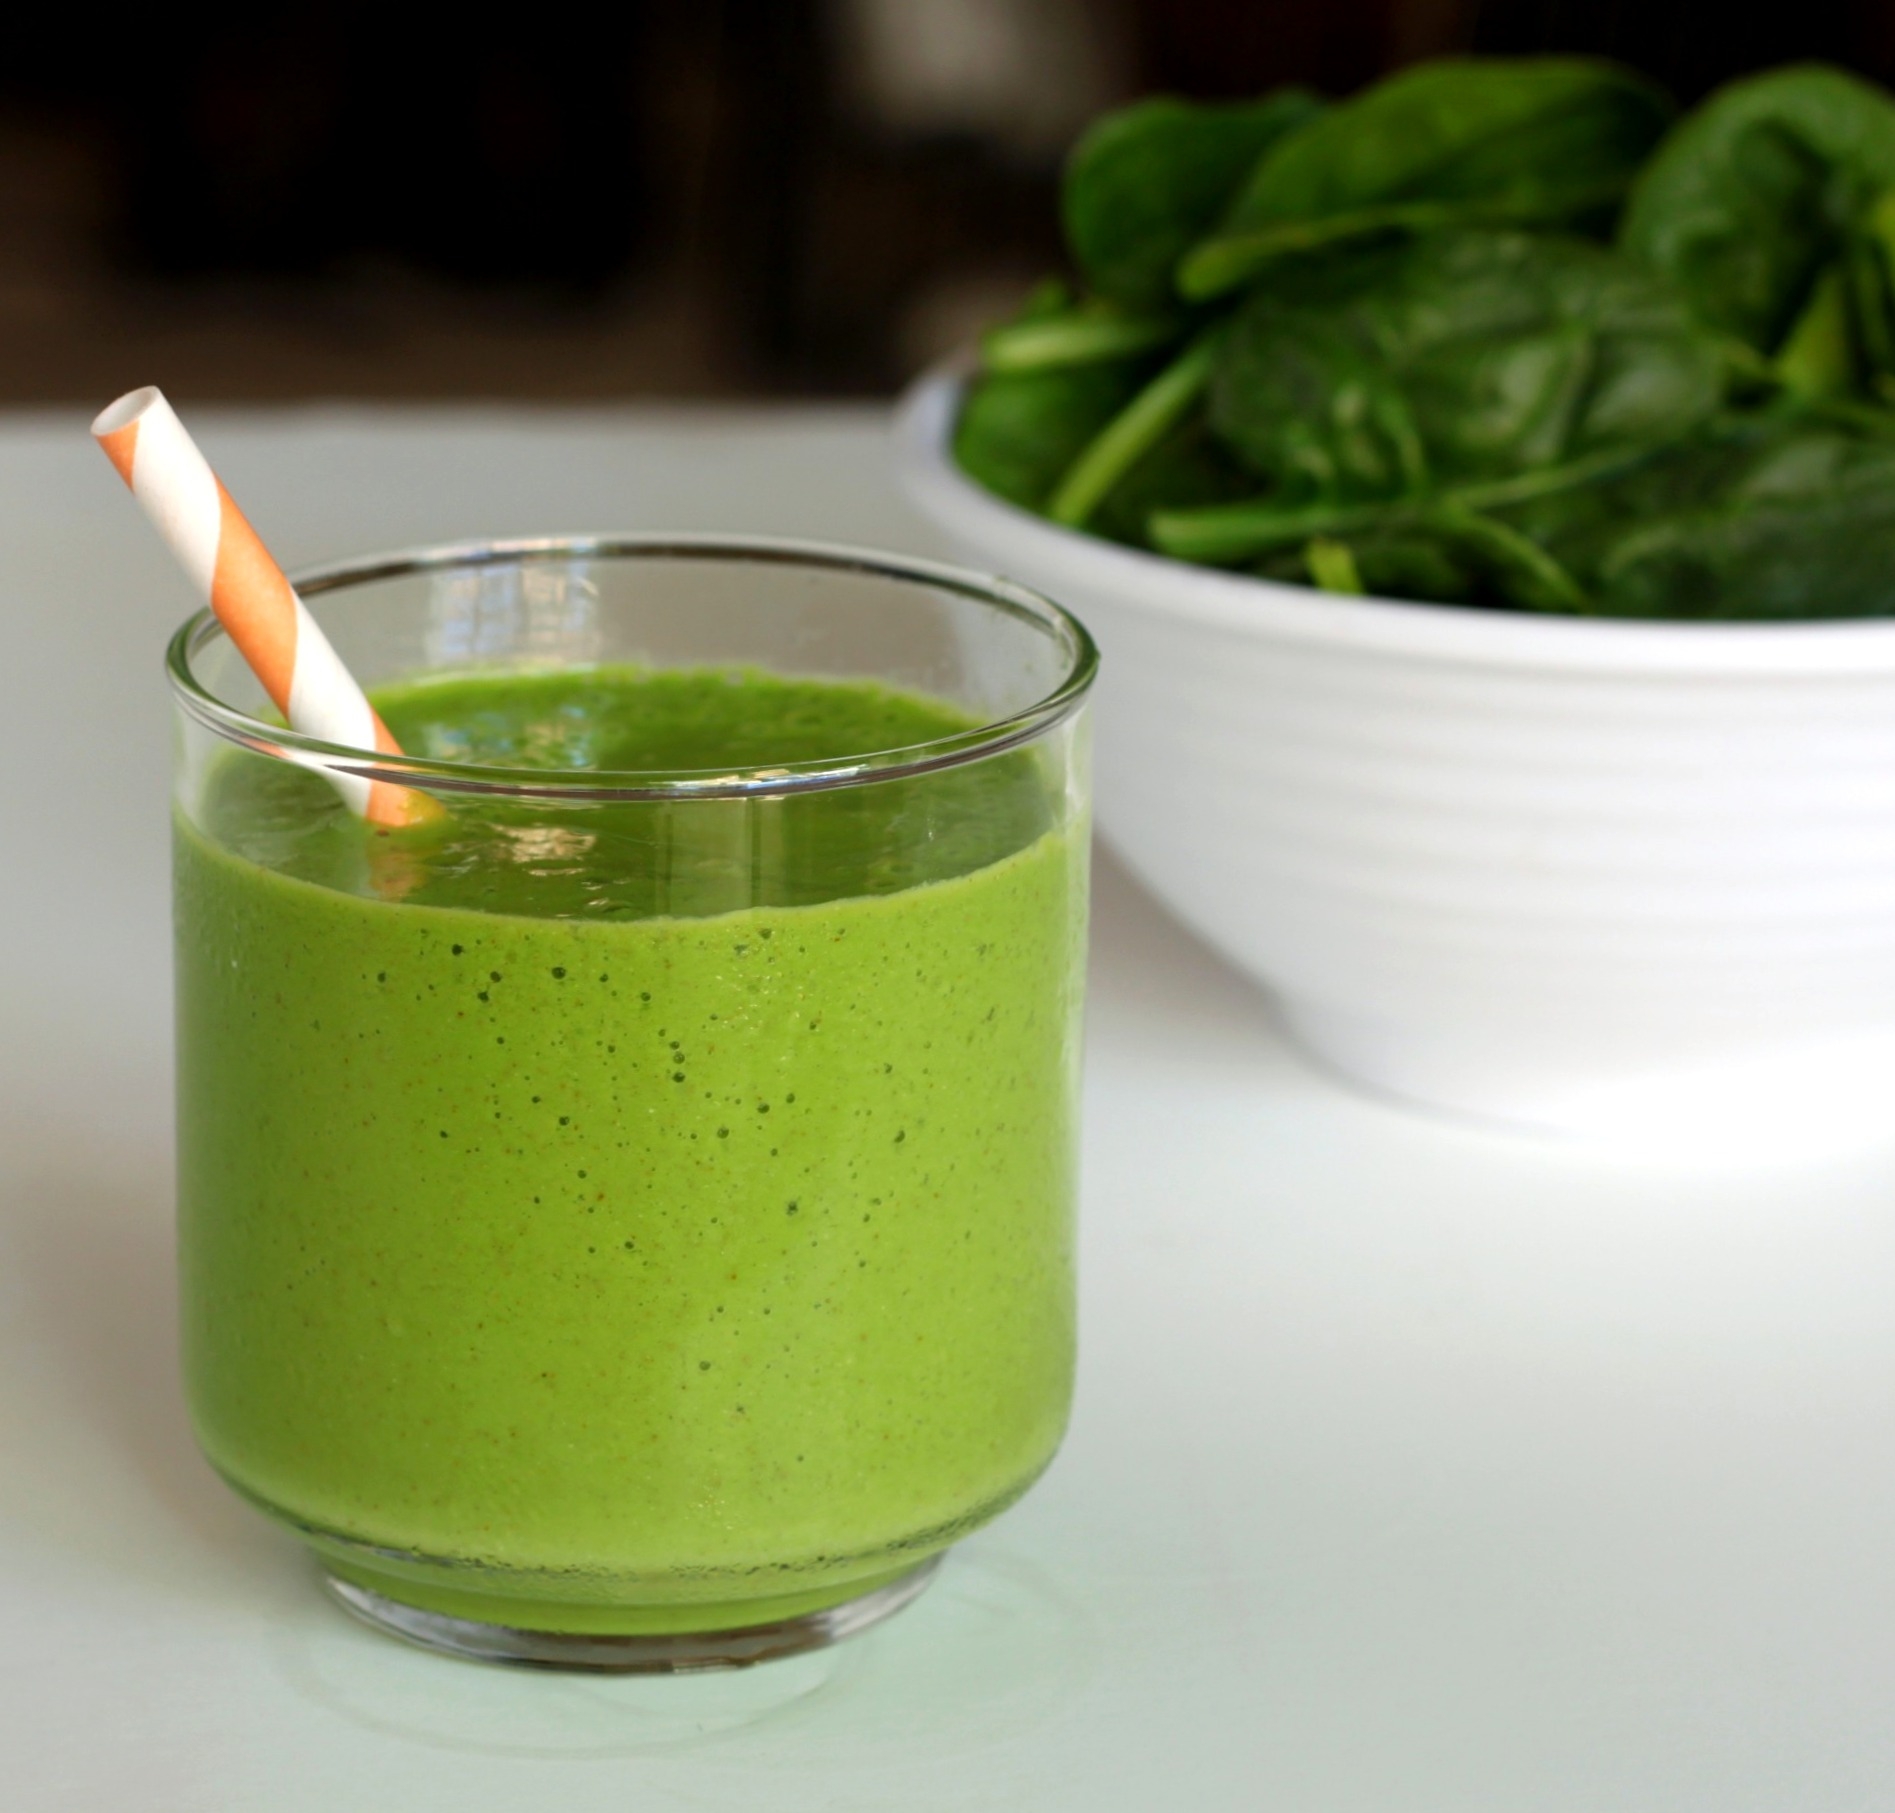 Ripped Recipes - Green Tea Weight Loss Smoothie